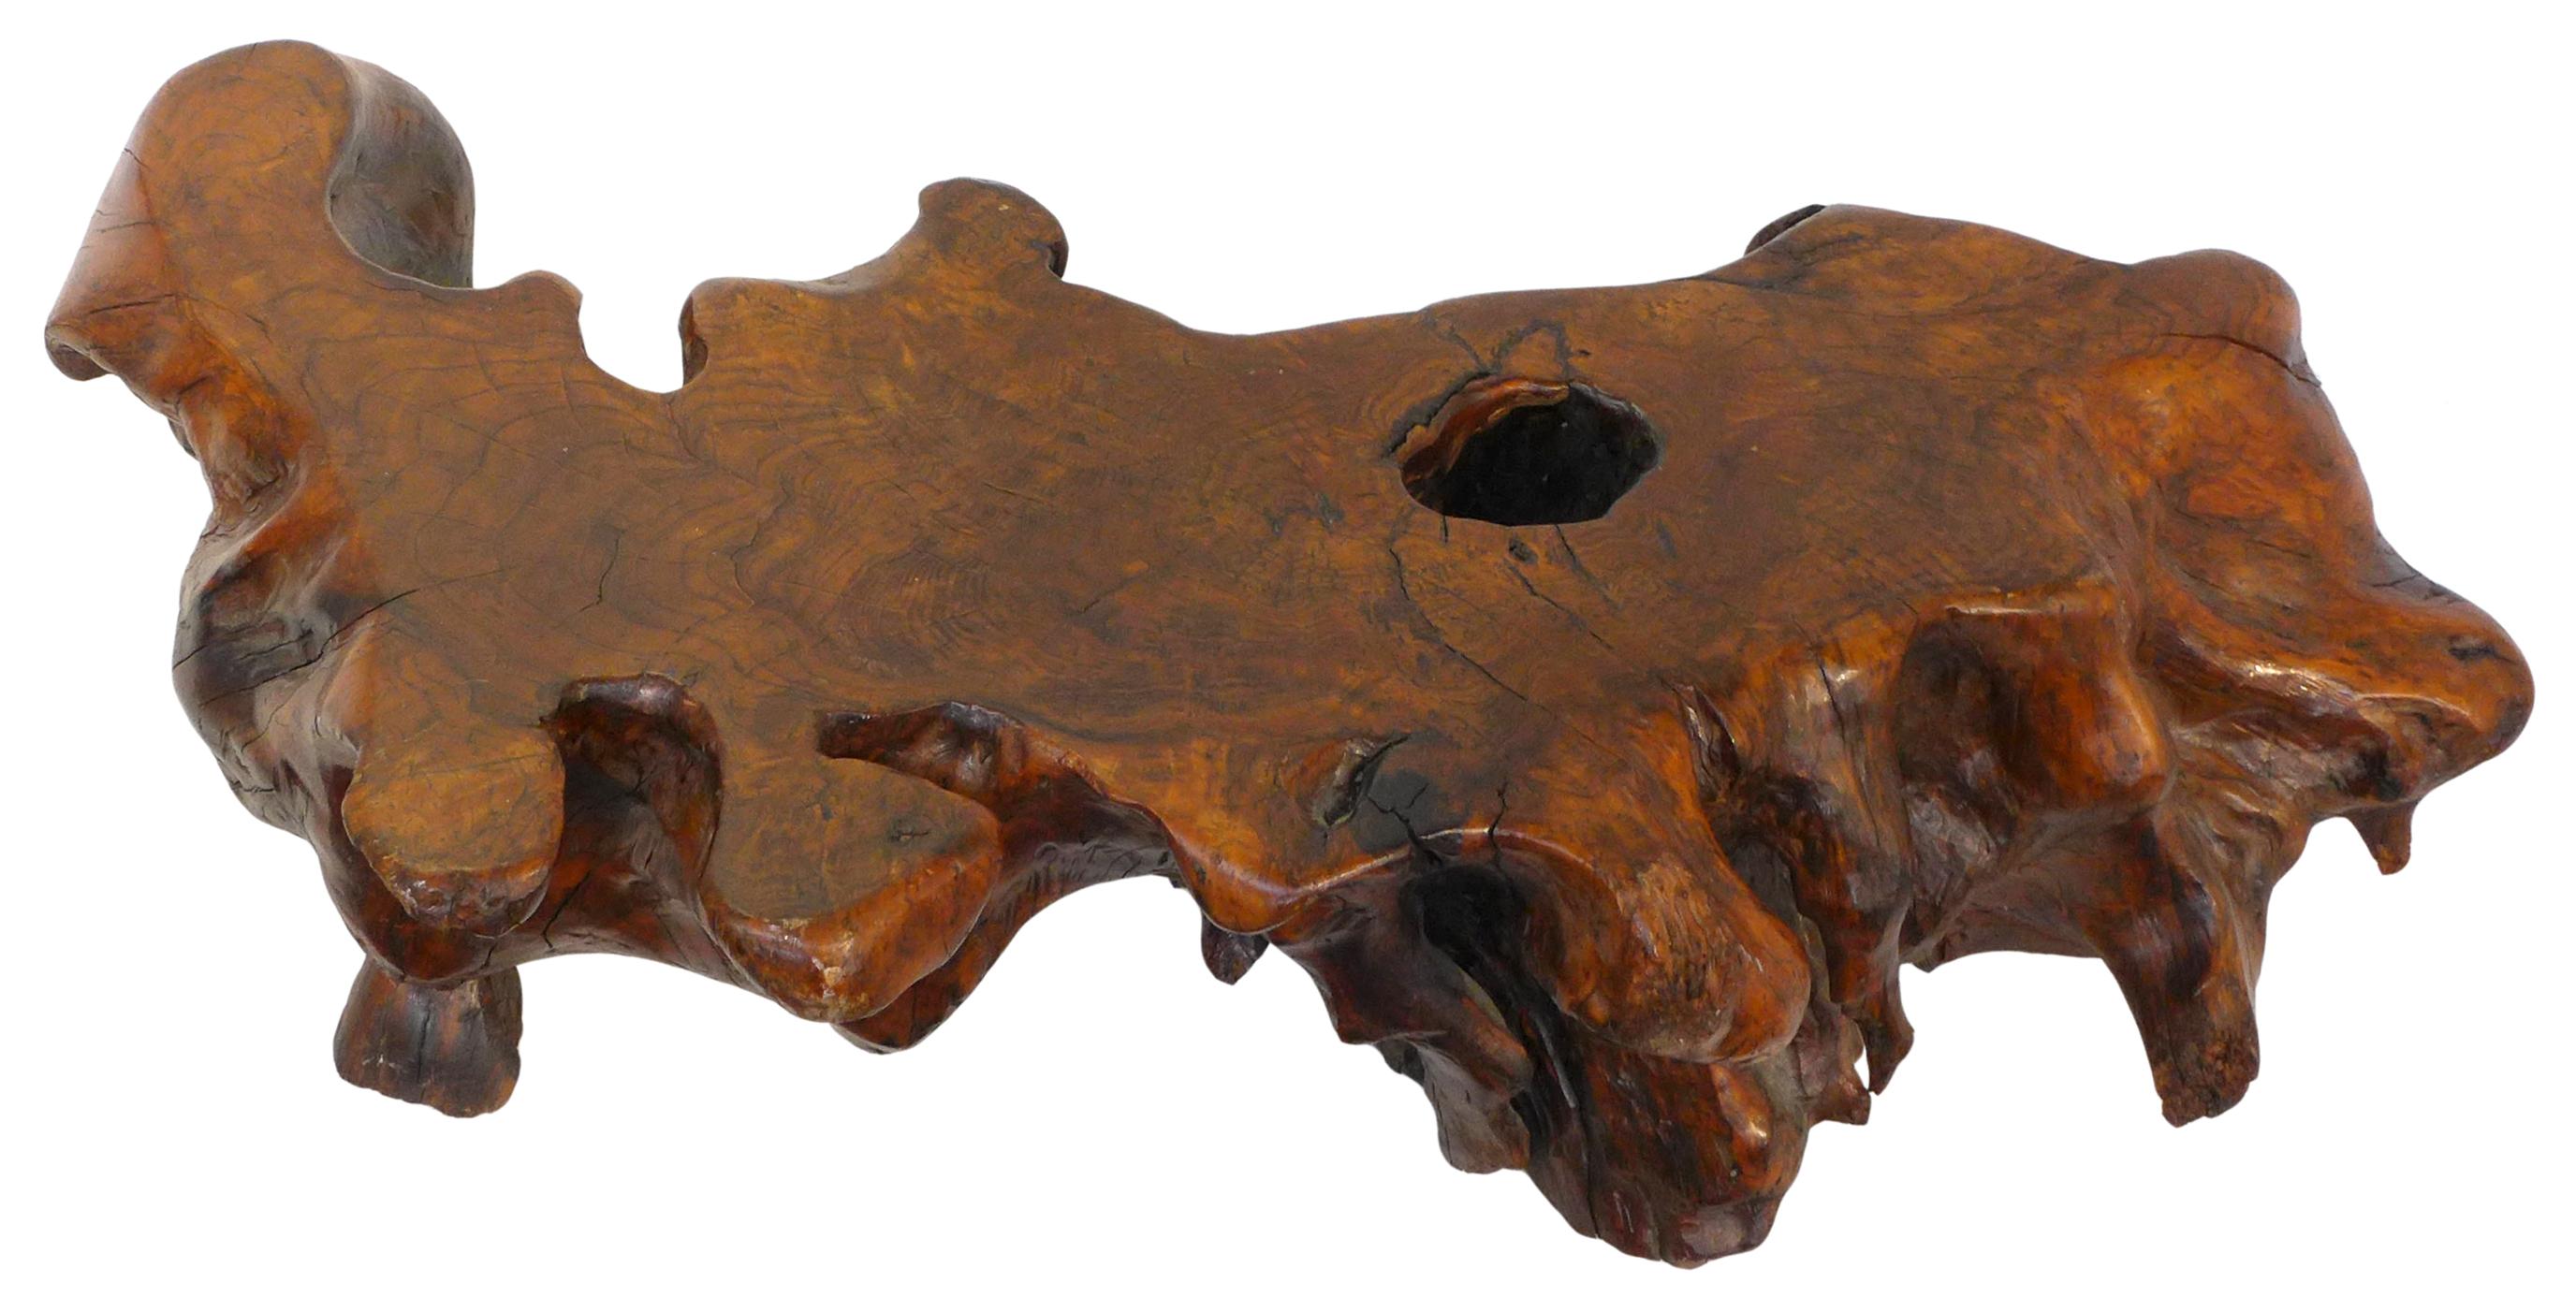 A fantastic live-edge burl root-wood coffee table. Carved nearly entirely of one wonderfully gnarled piece of wood, an extraordinary example of this family of burl furniture; an unusual, wildly-undulating, crescent tabletop with great raw edge